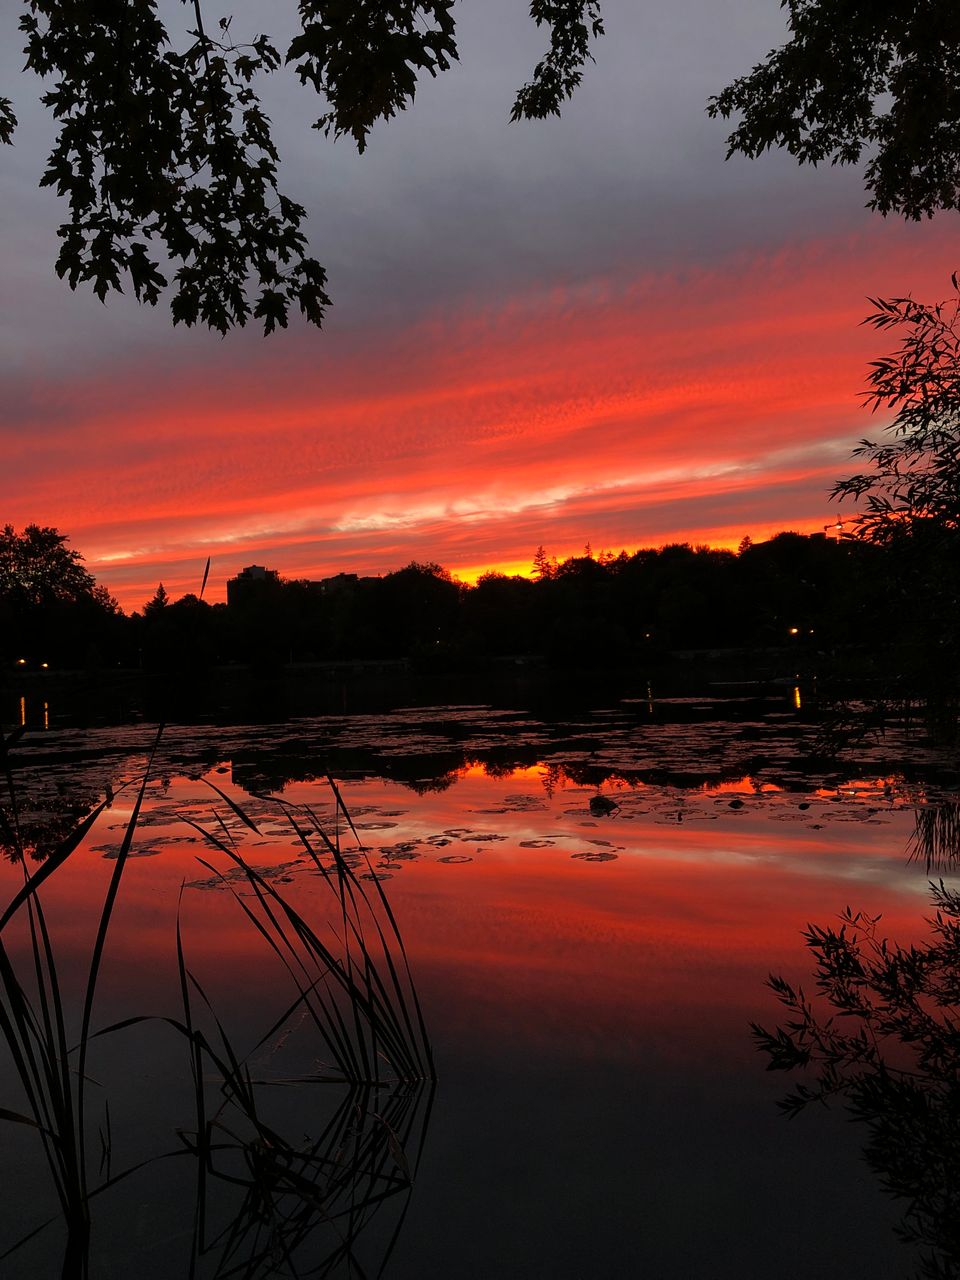 A very dramatic sunset over a river covered in lily pads and framed in long grasses and leaves from surrounding trees.